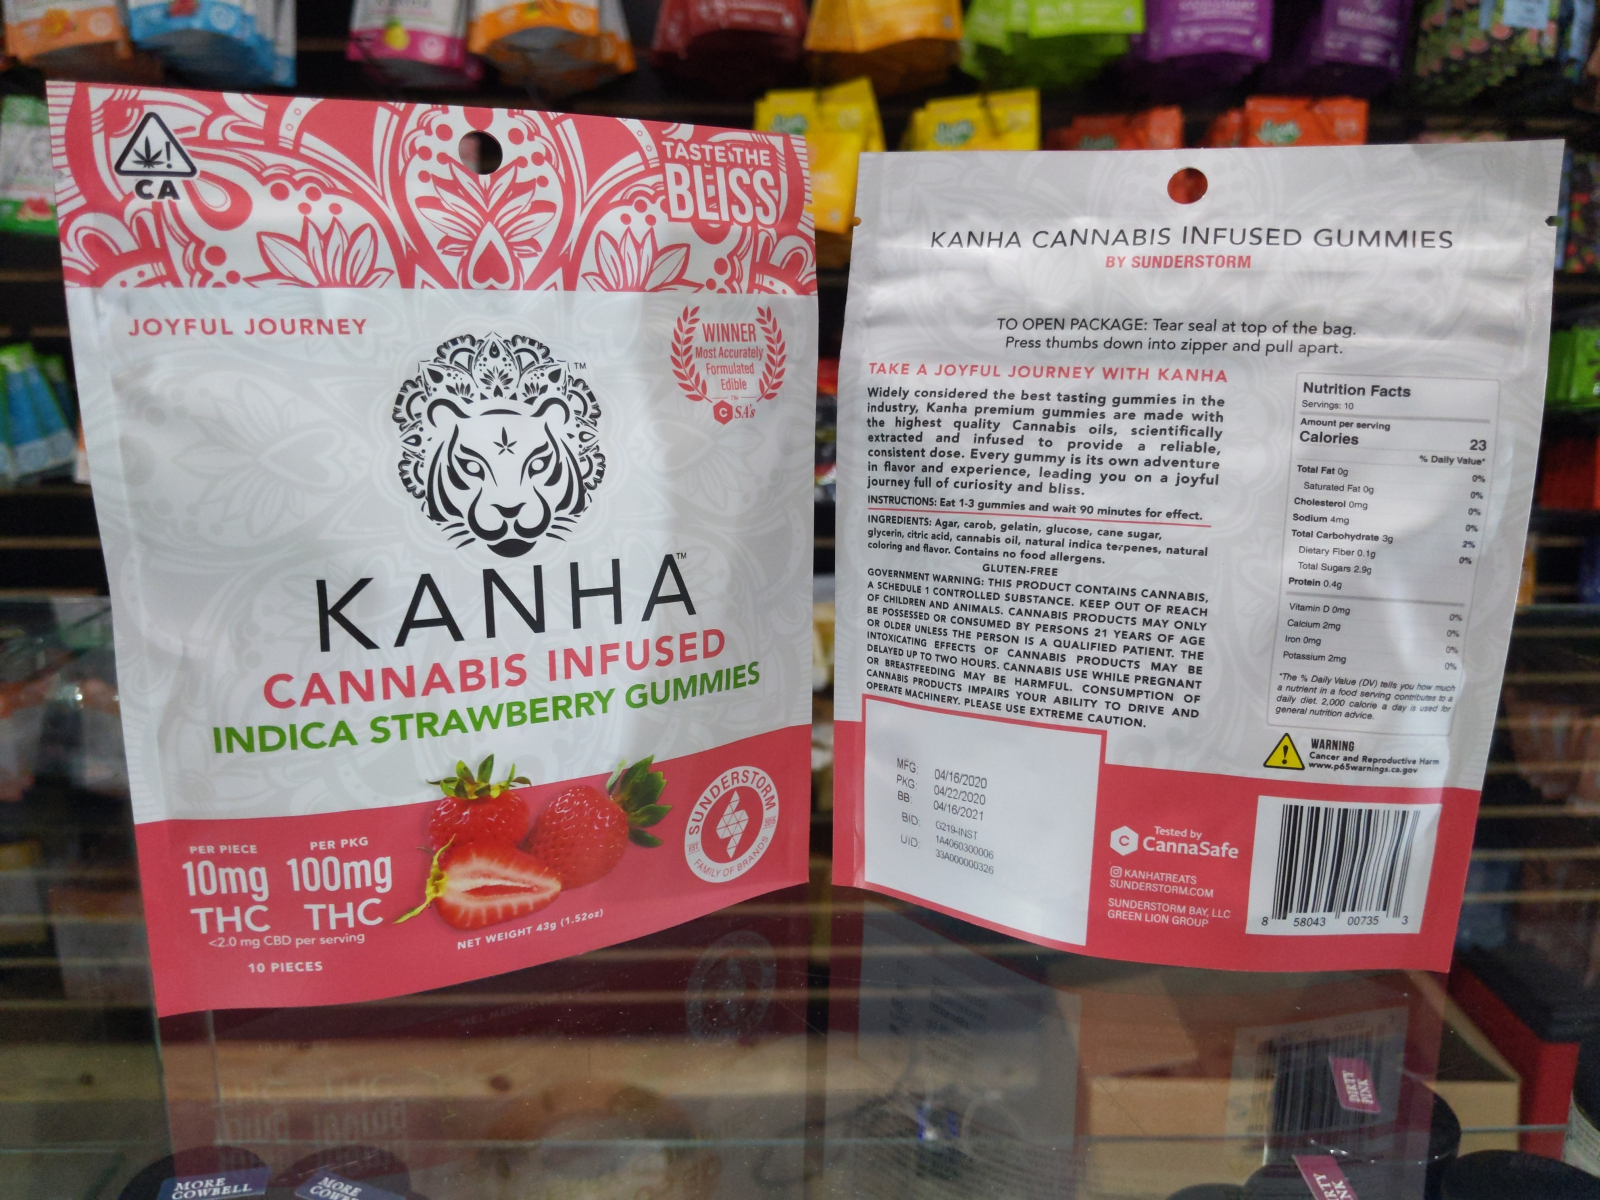 Kanha cannabis infused gummies. Strawberry flavored. 10 pieces, 10 mg of thc per piece. 100mg thx per package